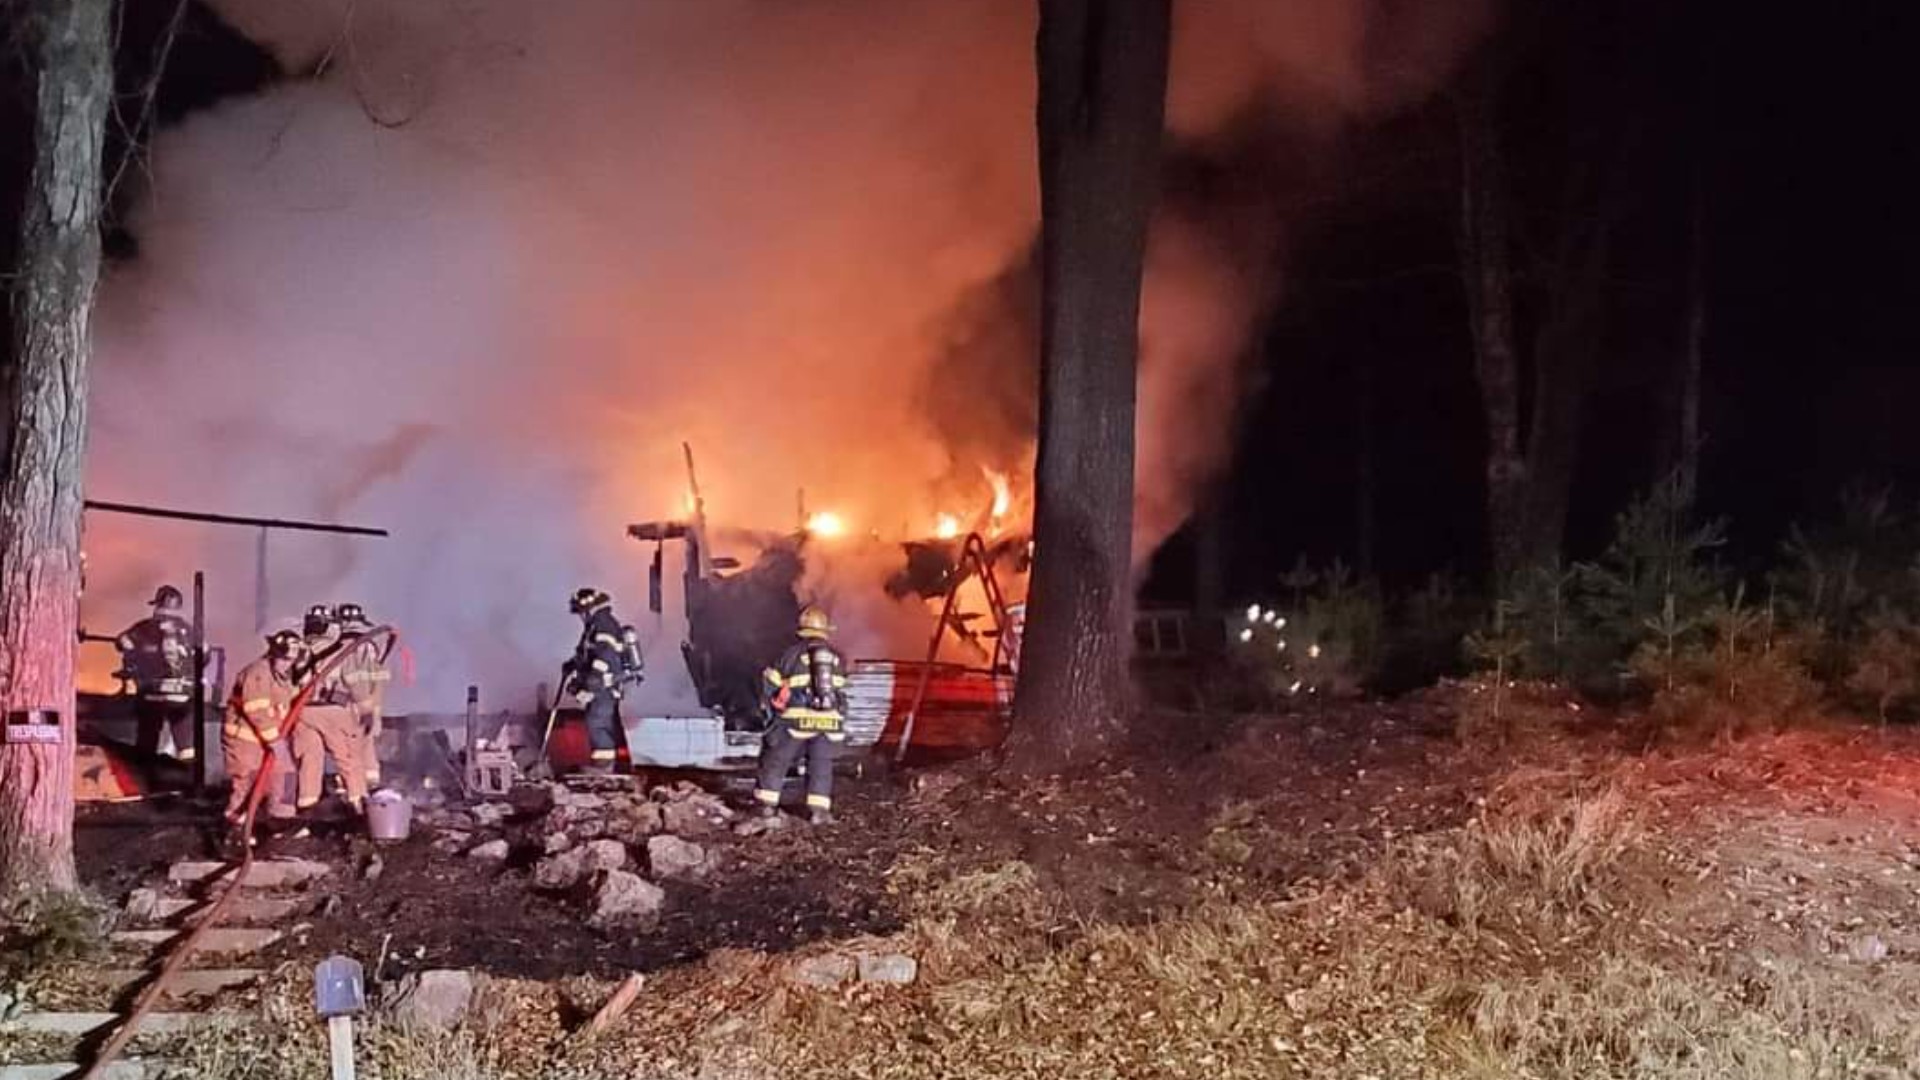 The fire happened in Delaware Township, near Dingmans Ferry, on Sunday night.